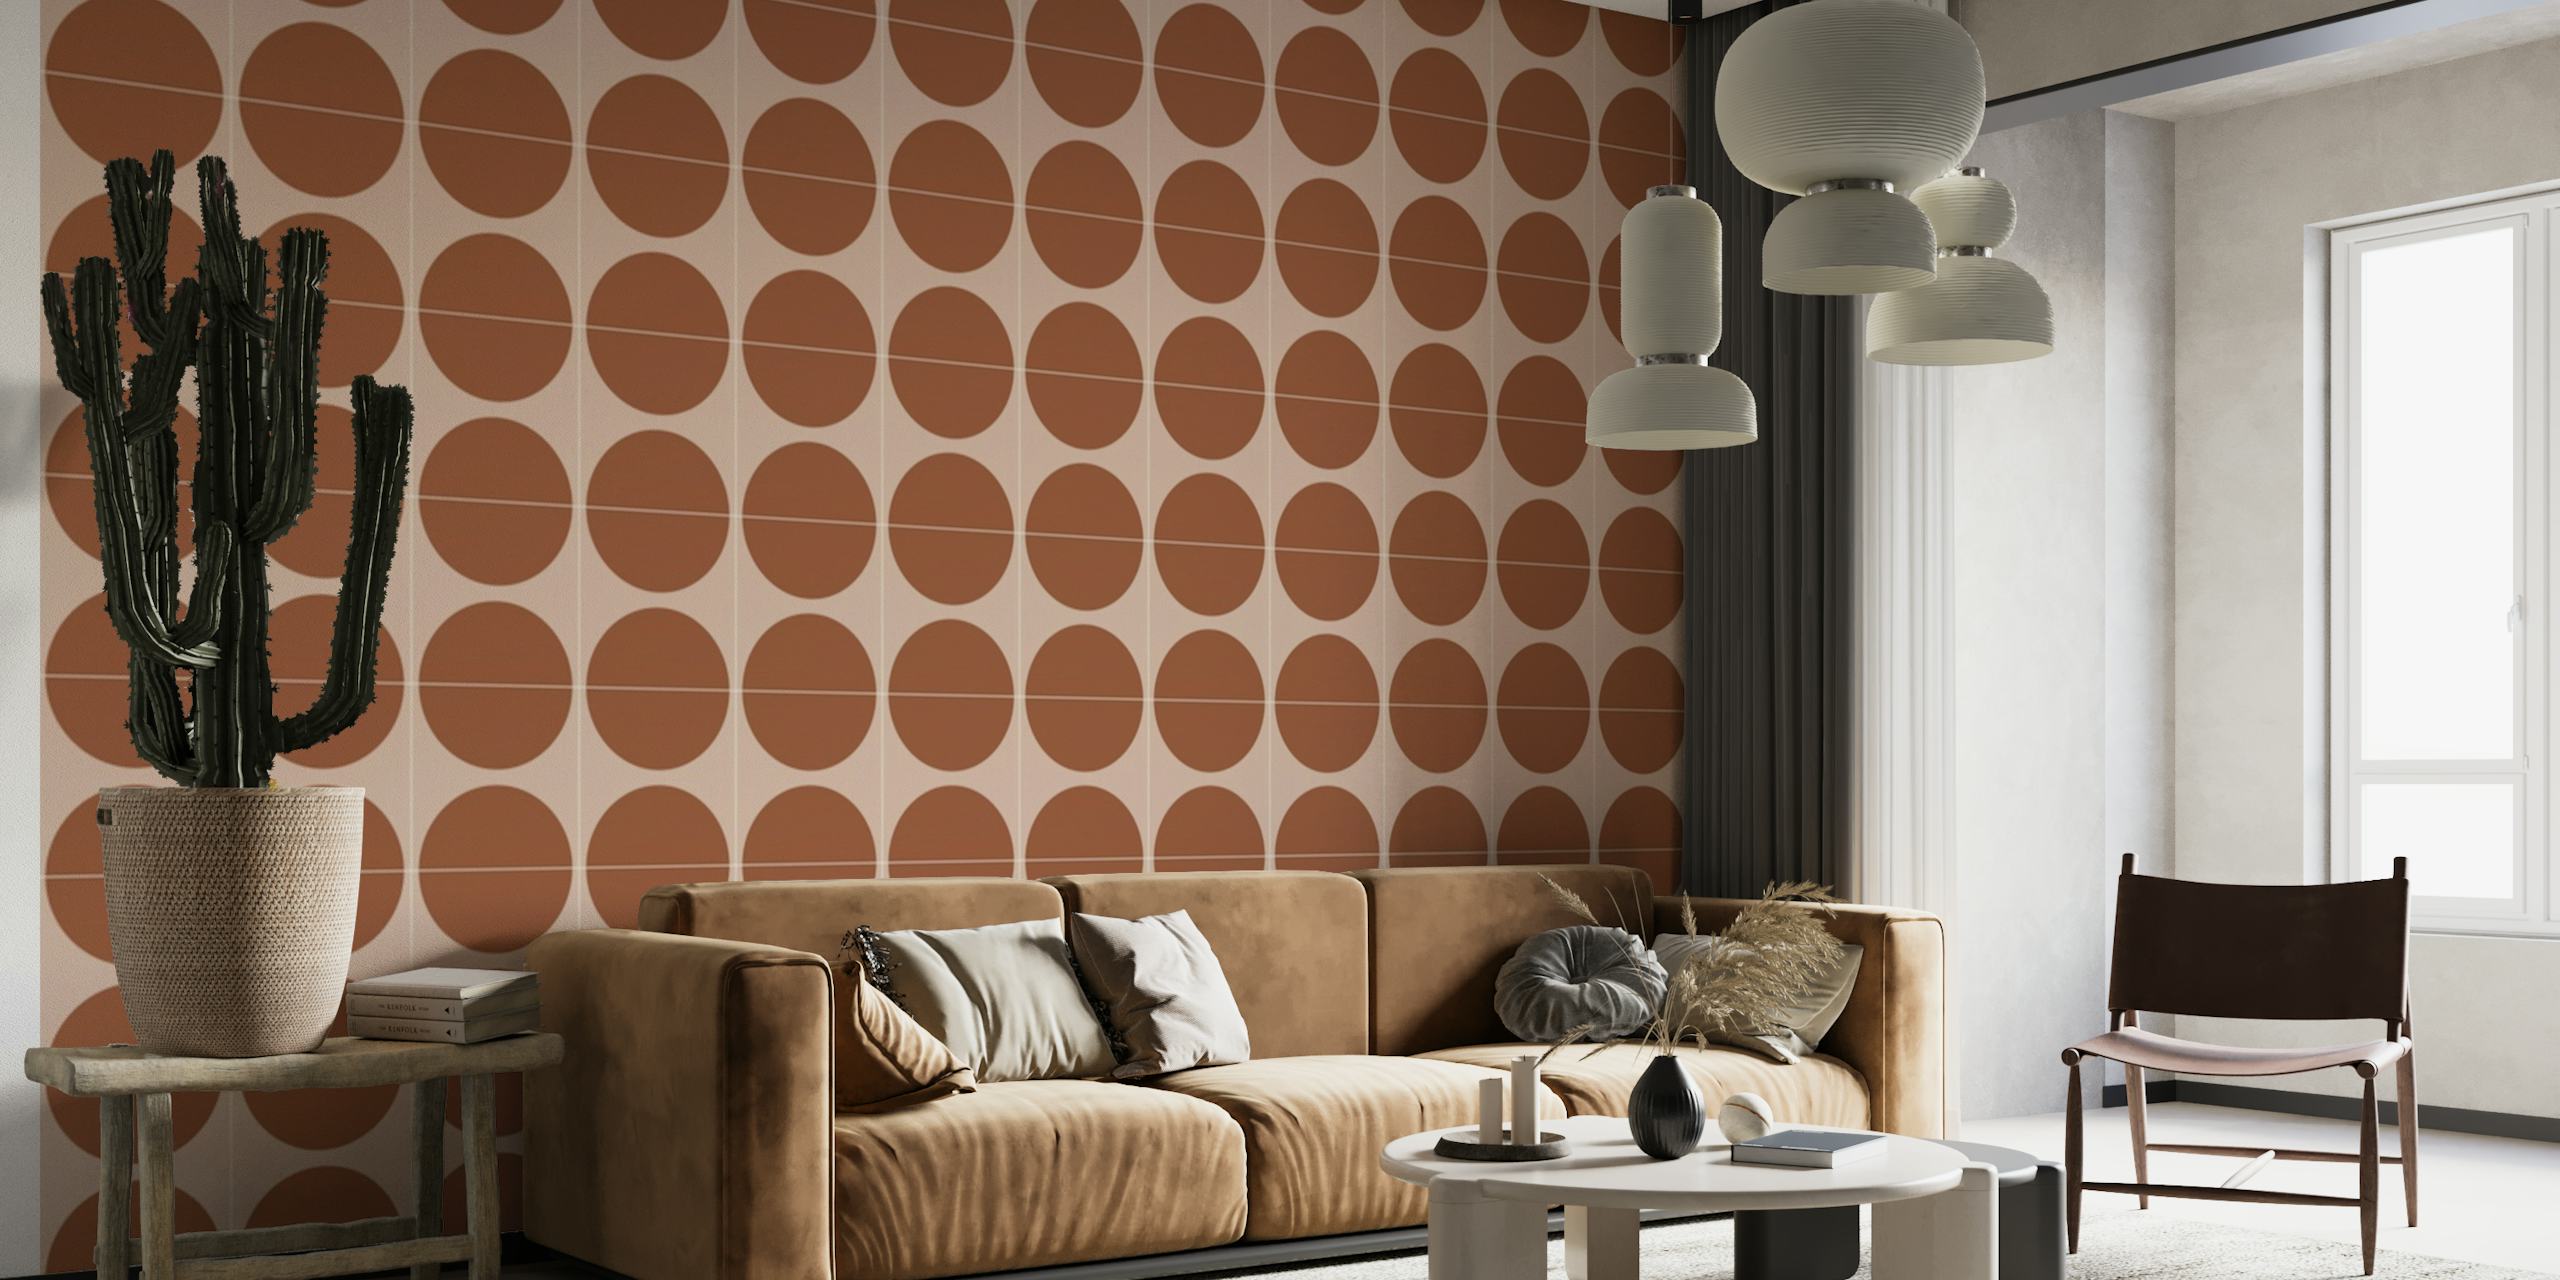 Painted Cotto Tiles Cinnamon tapet